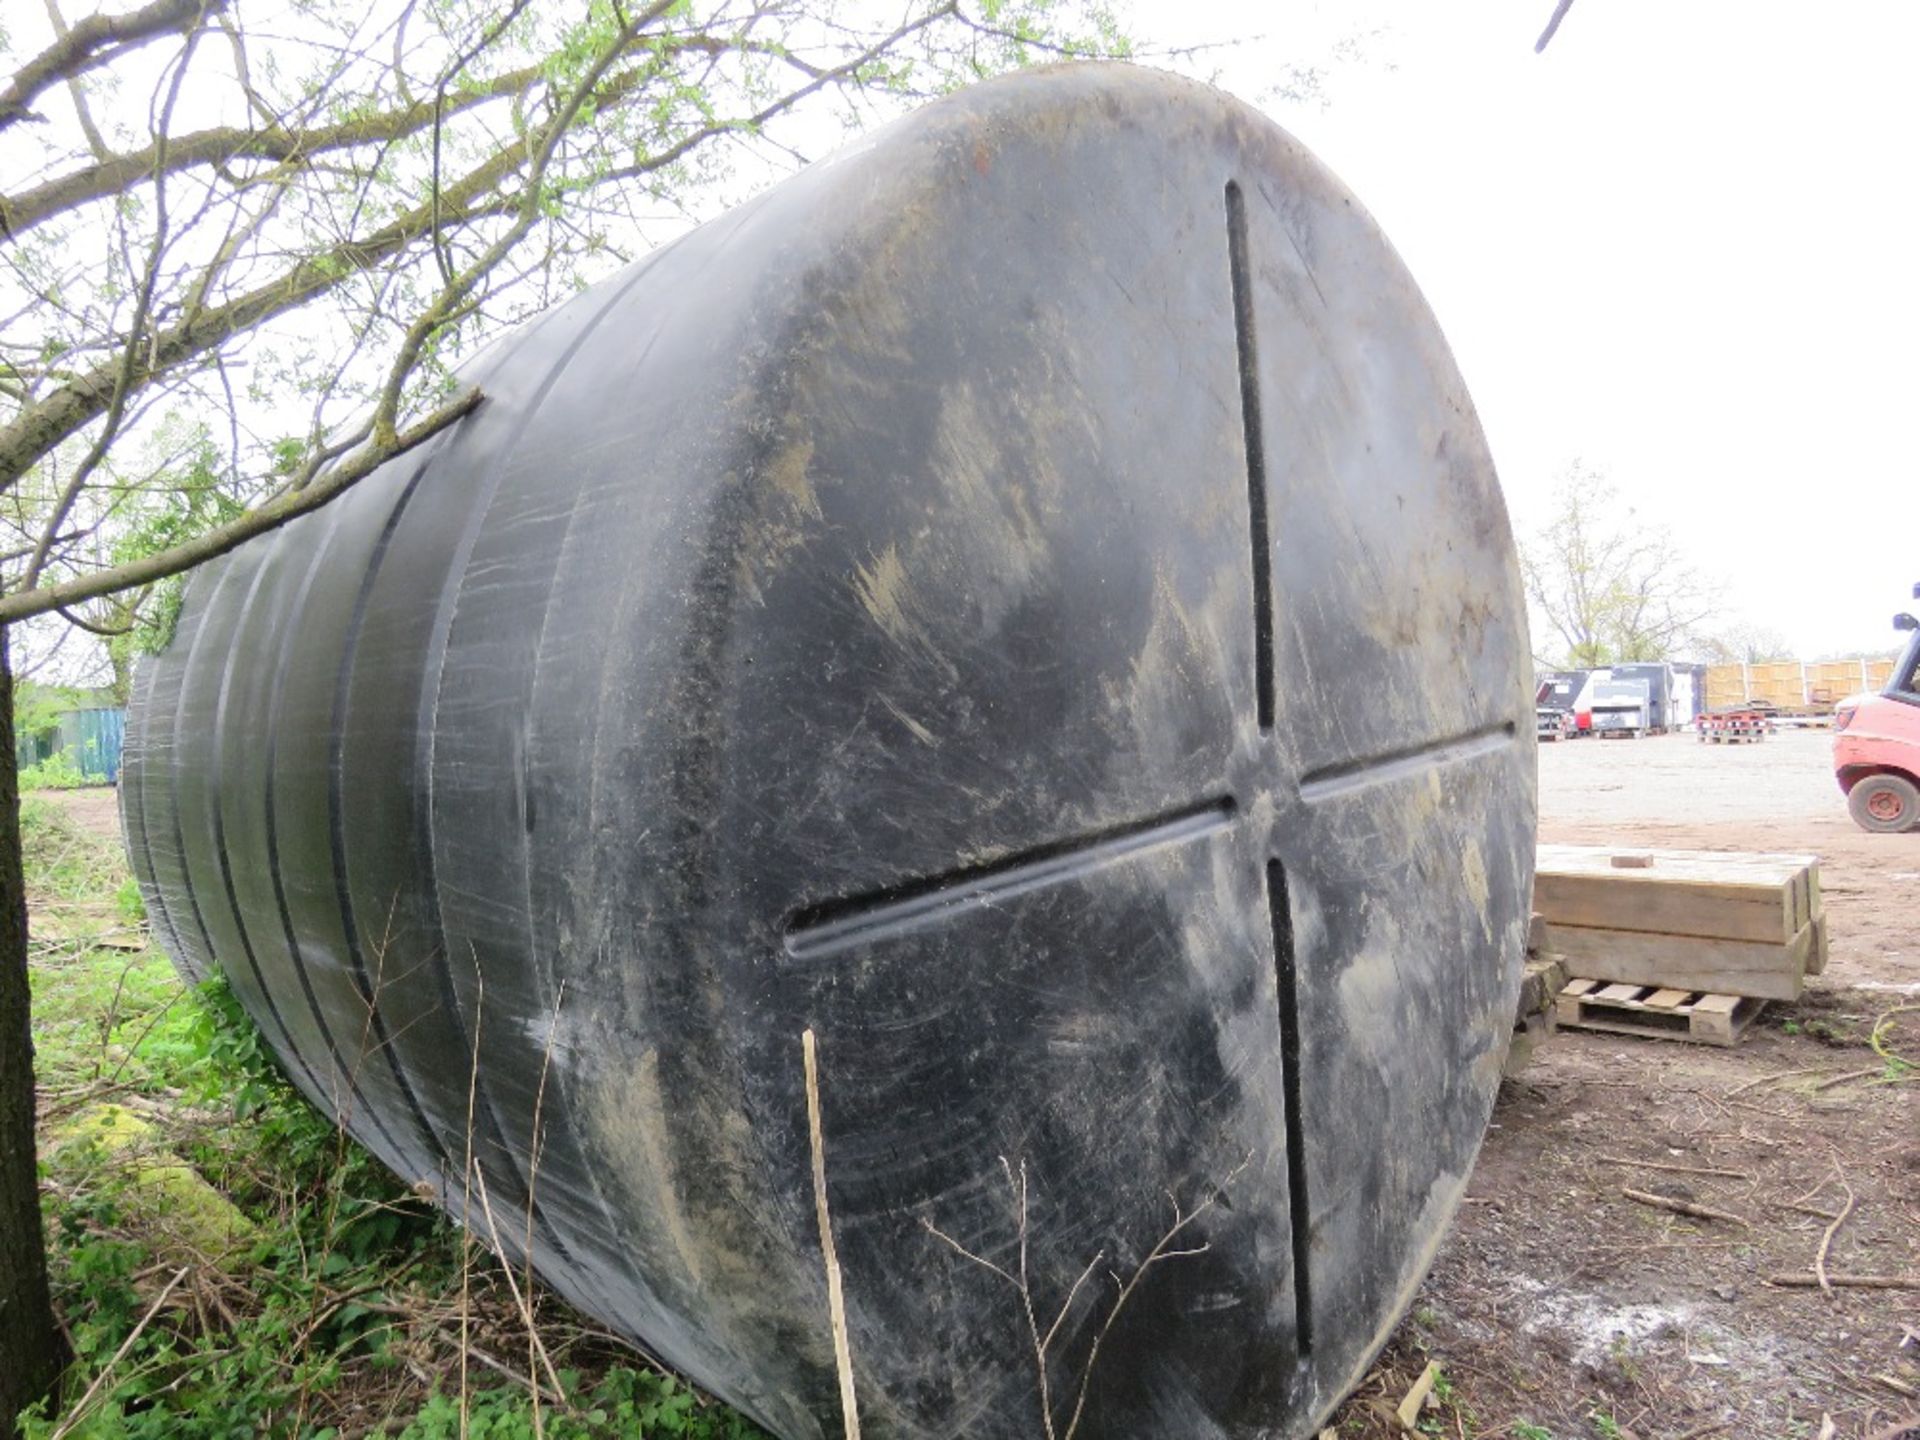 EXTRA LARGE WATER STORAGE TANK 10FT HEIGHT X 9FT DIAMETER APPROX. DAMAGED IN THE MIDDLE AS SHOWN. EX - Image 5 of 10